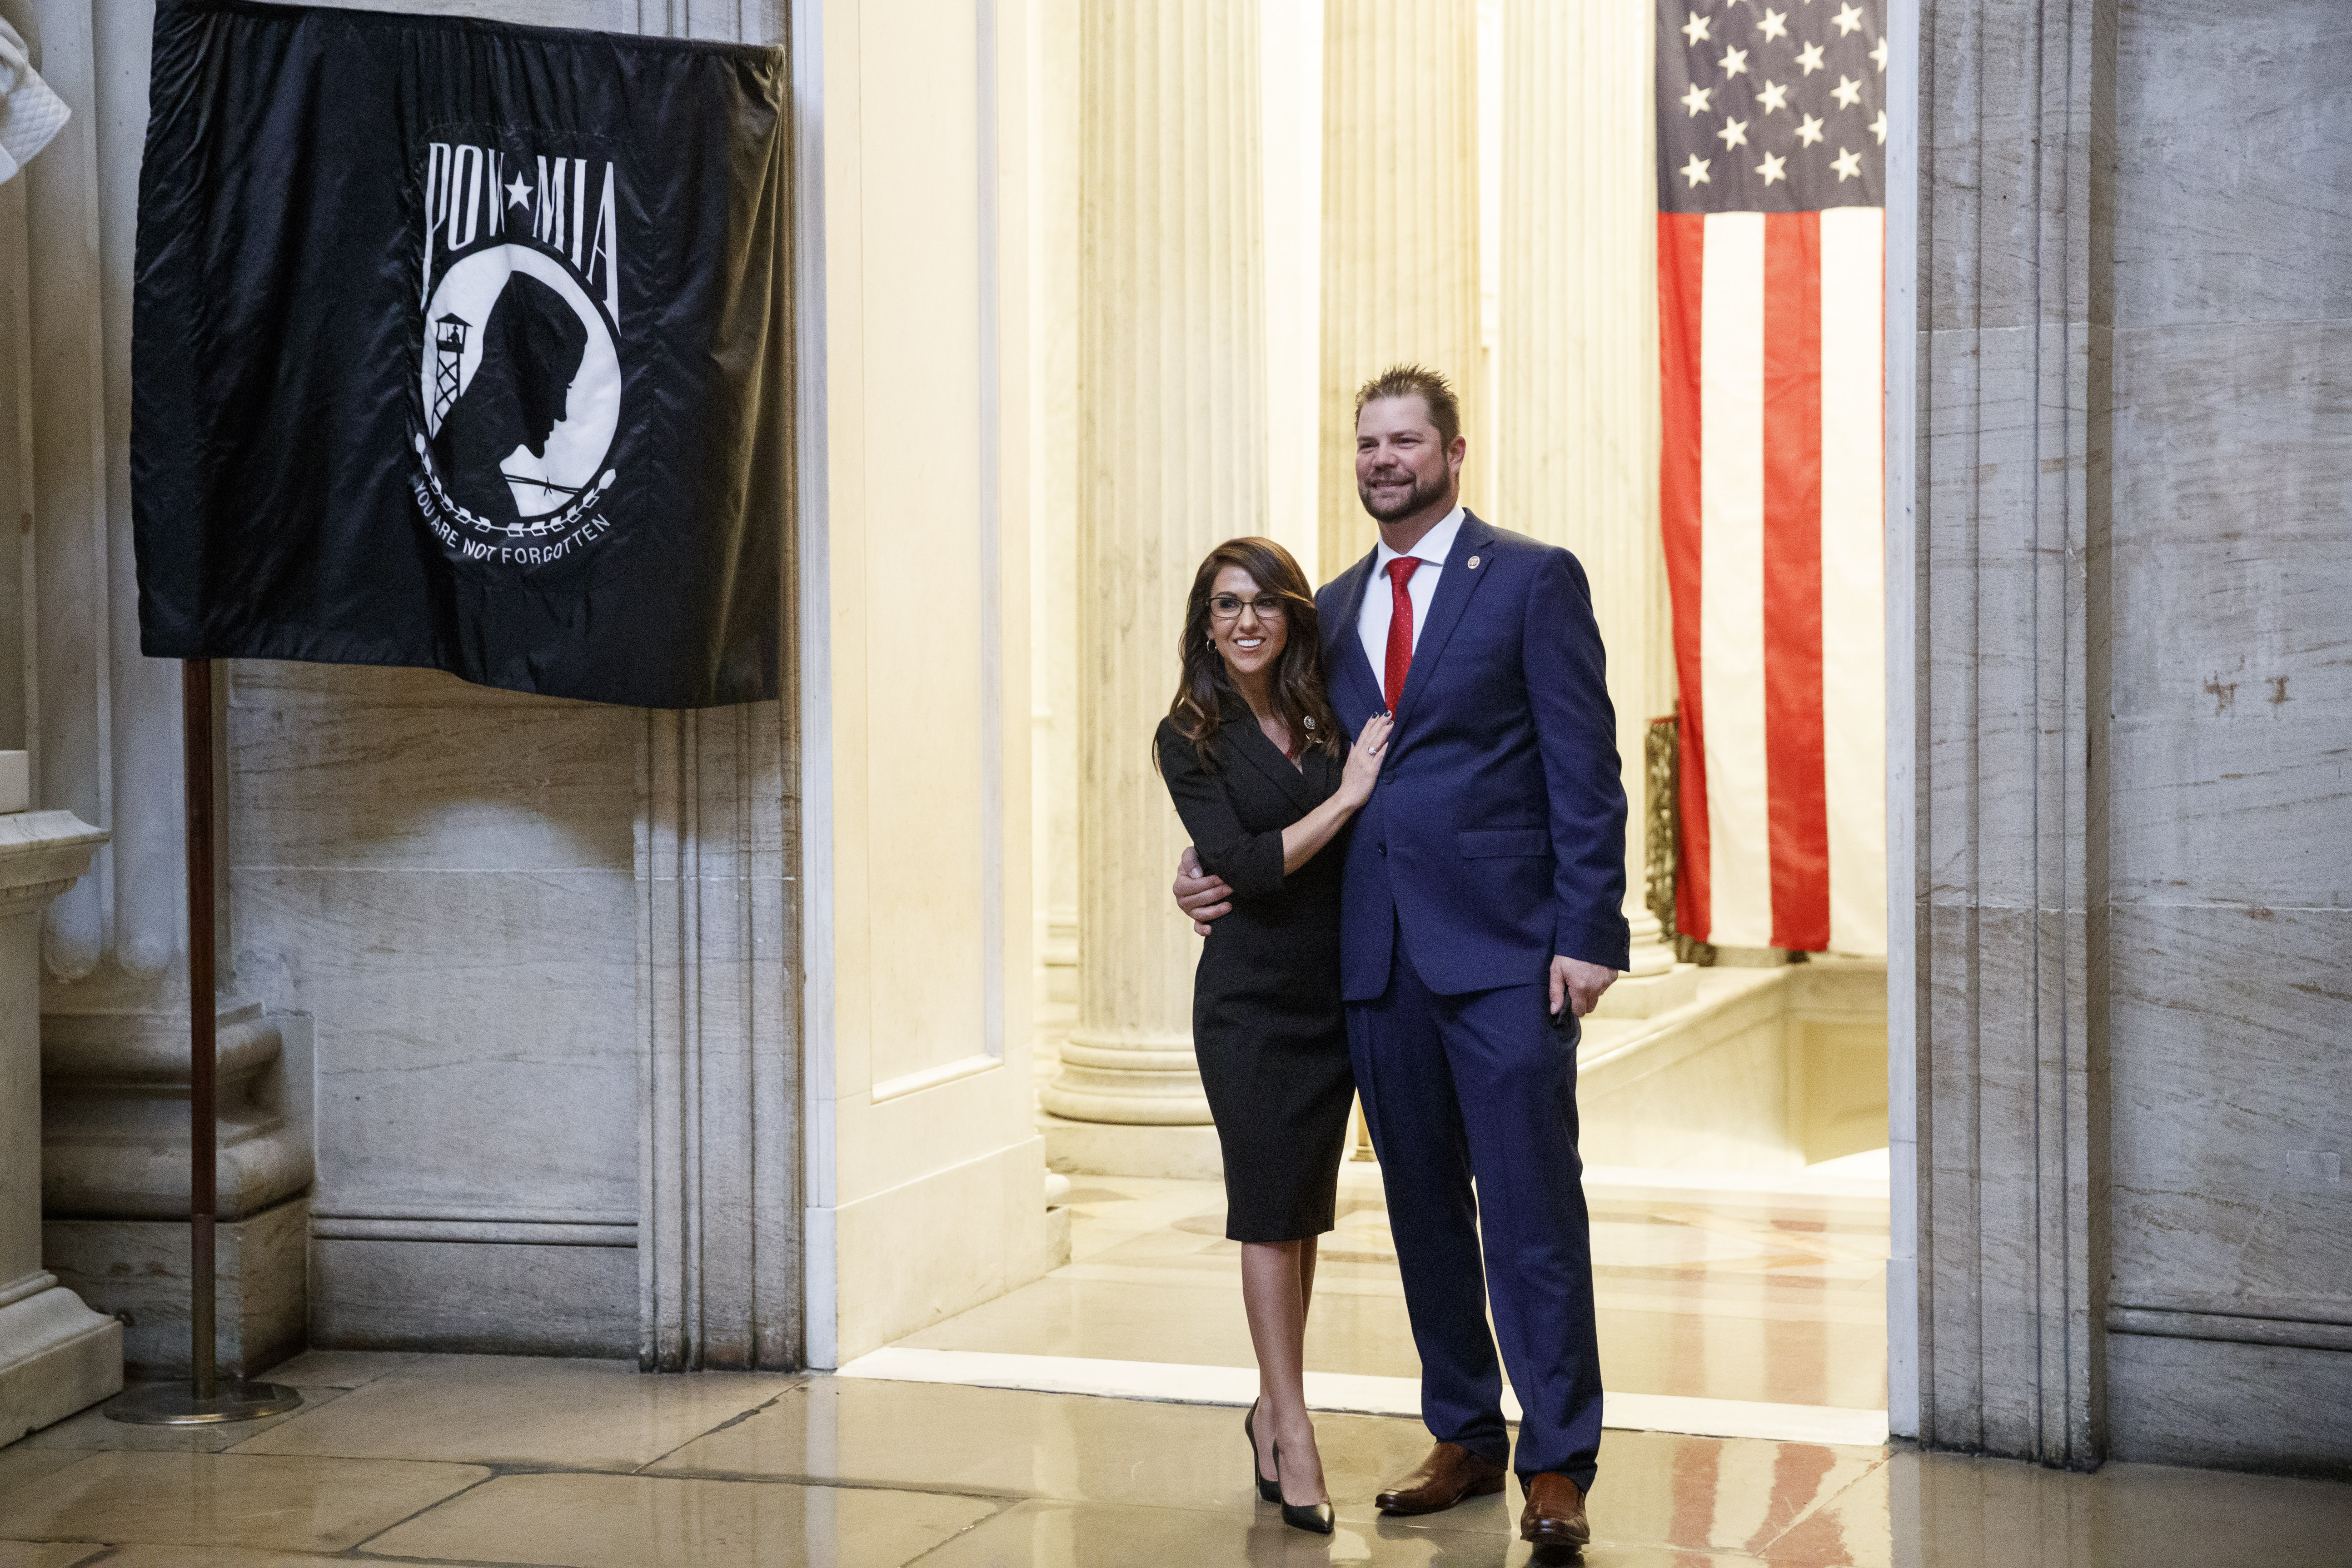 Rep. Lauren Boebert stands for a photograph with her husband Jayson Boebert at the U.S. Capitol in Washington, D.C., U.S., on Jan. 3, 2021.